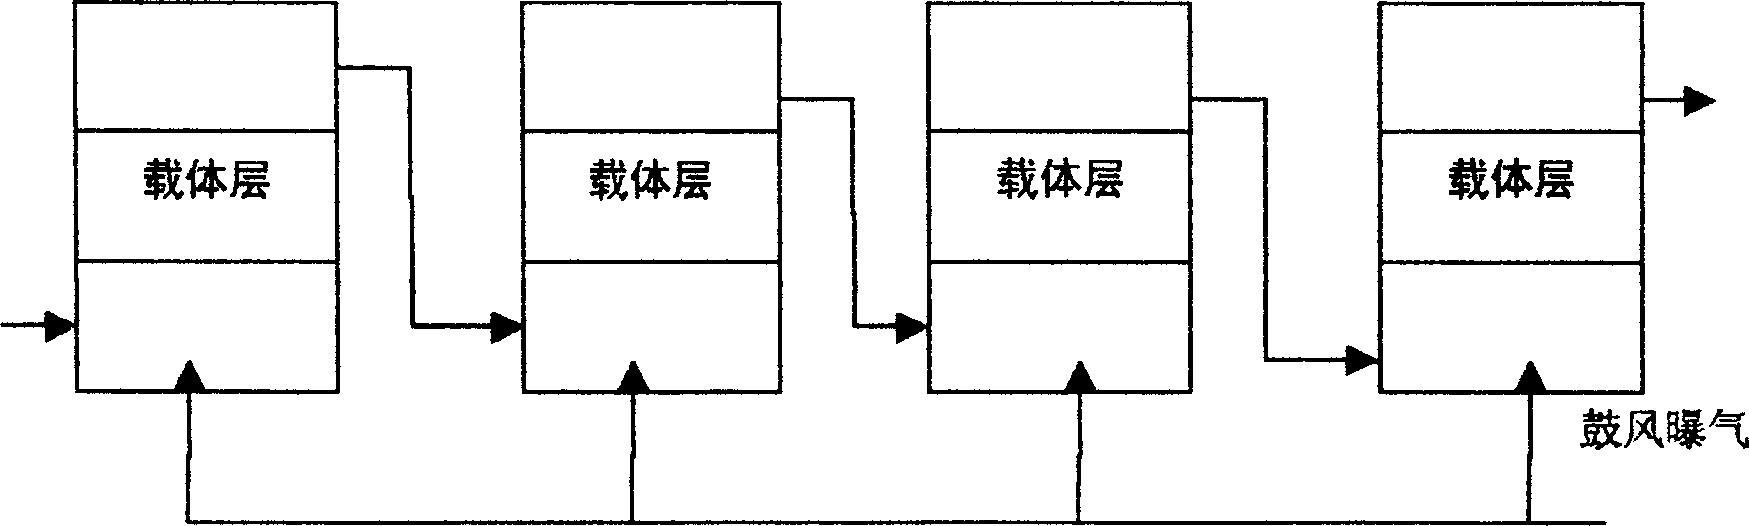 Treatment process for making sewage as recirculating cooling water